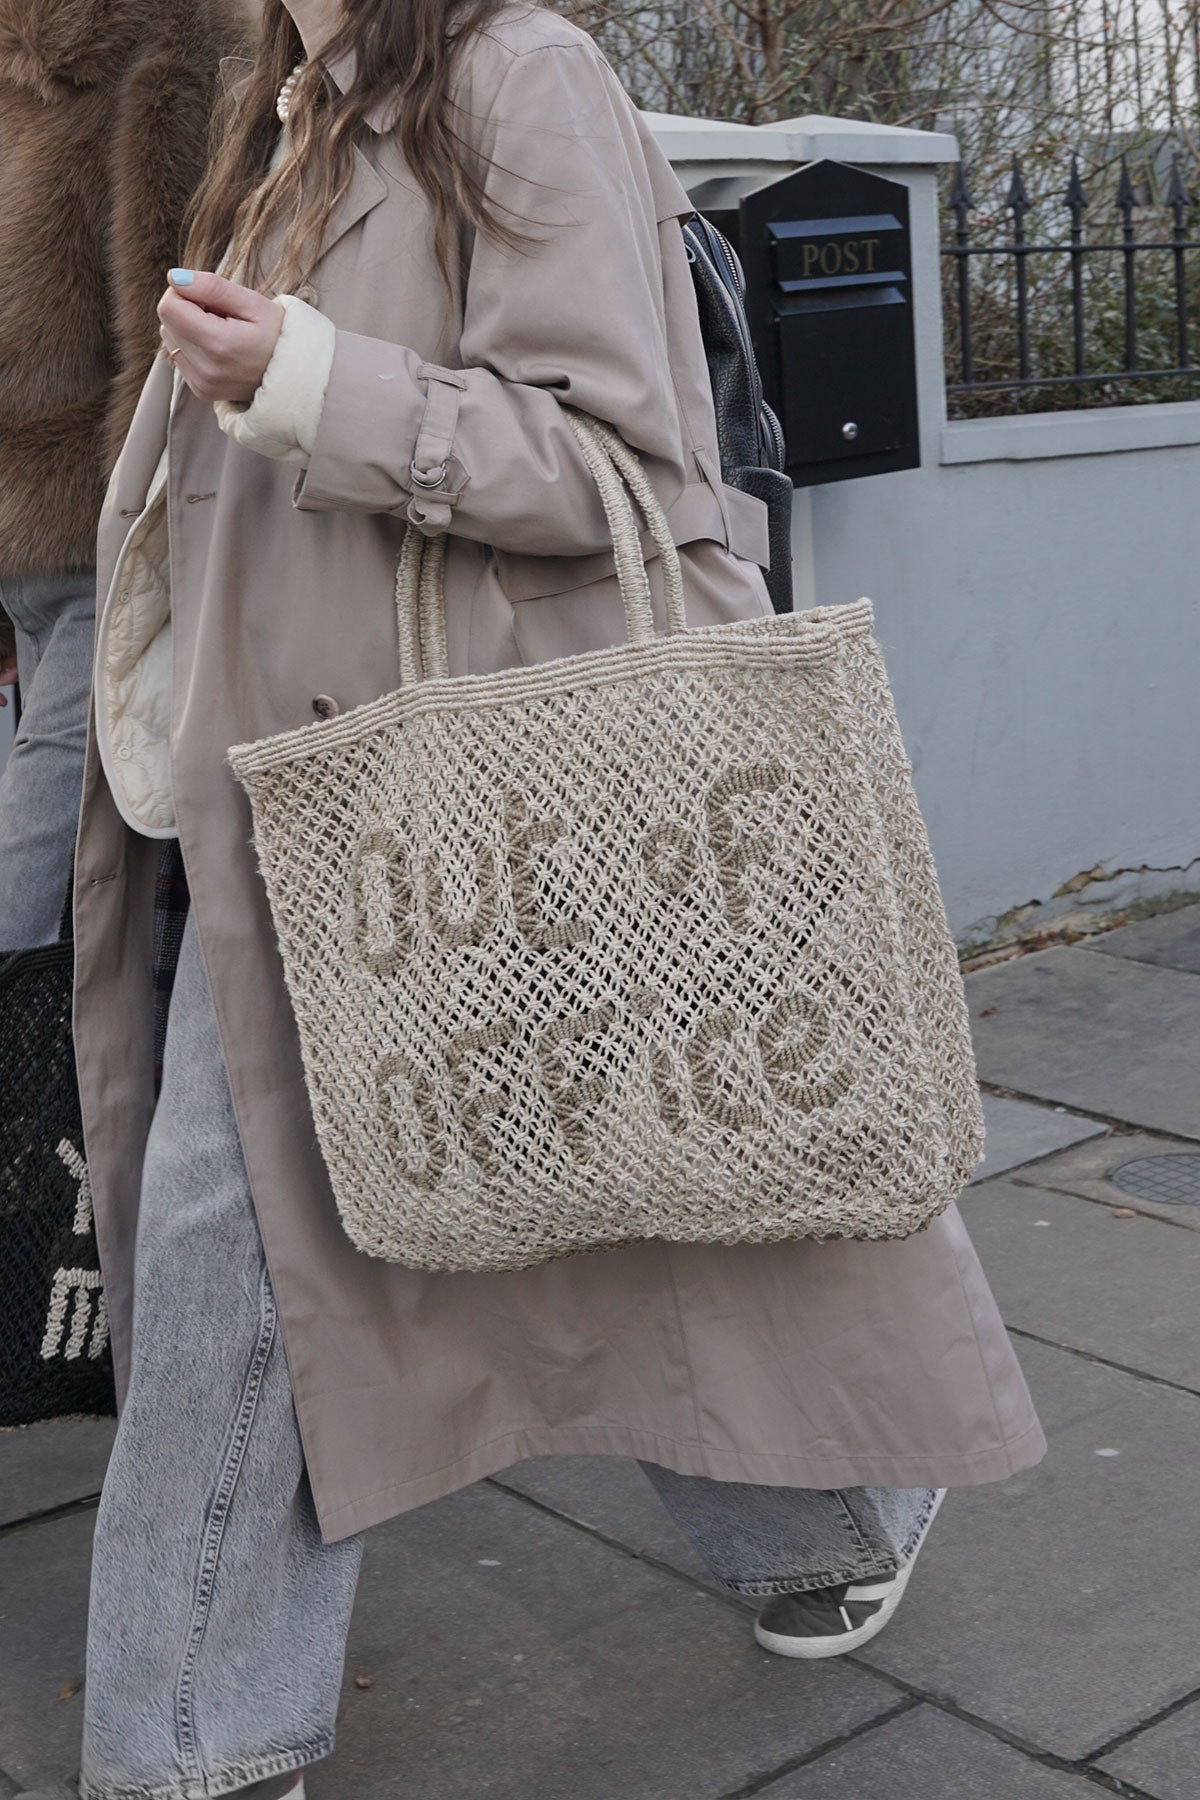 TIBA + MARL x The Jacksons Jute Tote 'Out Of Office'